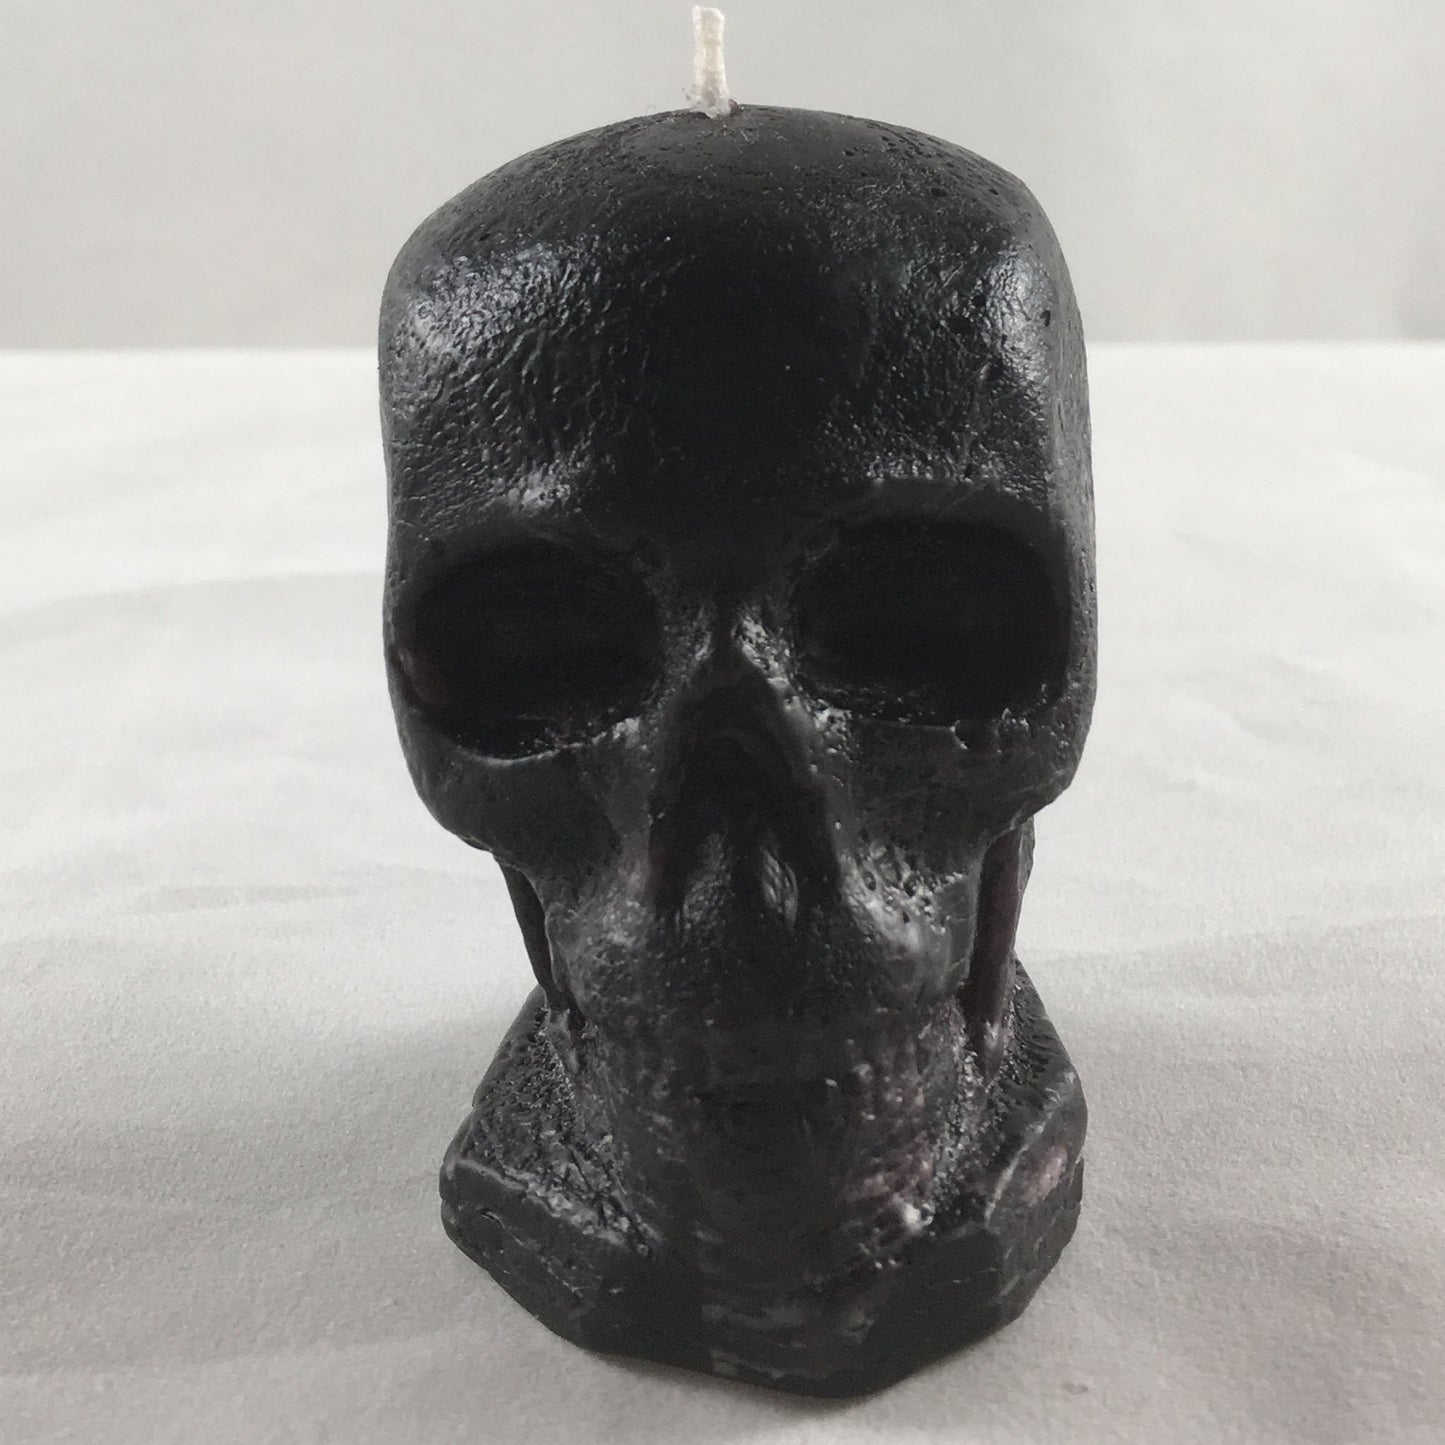 Skulls, 9 colours, 2 1/2"H, fragrance free only - Fanny Bay Candle Company